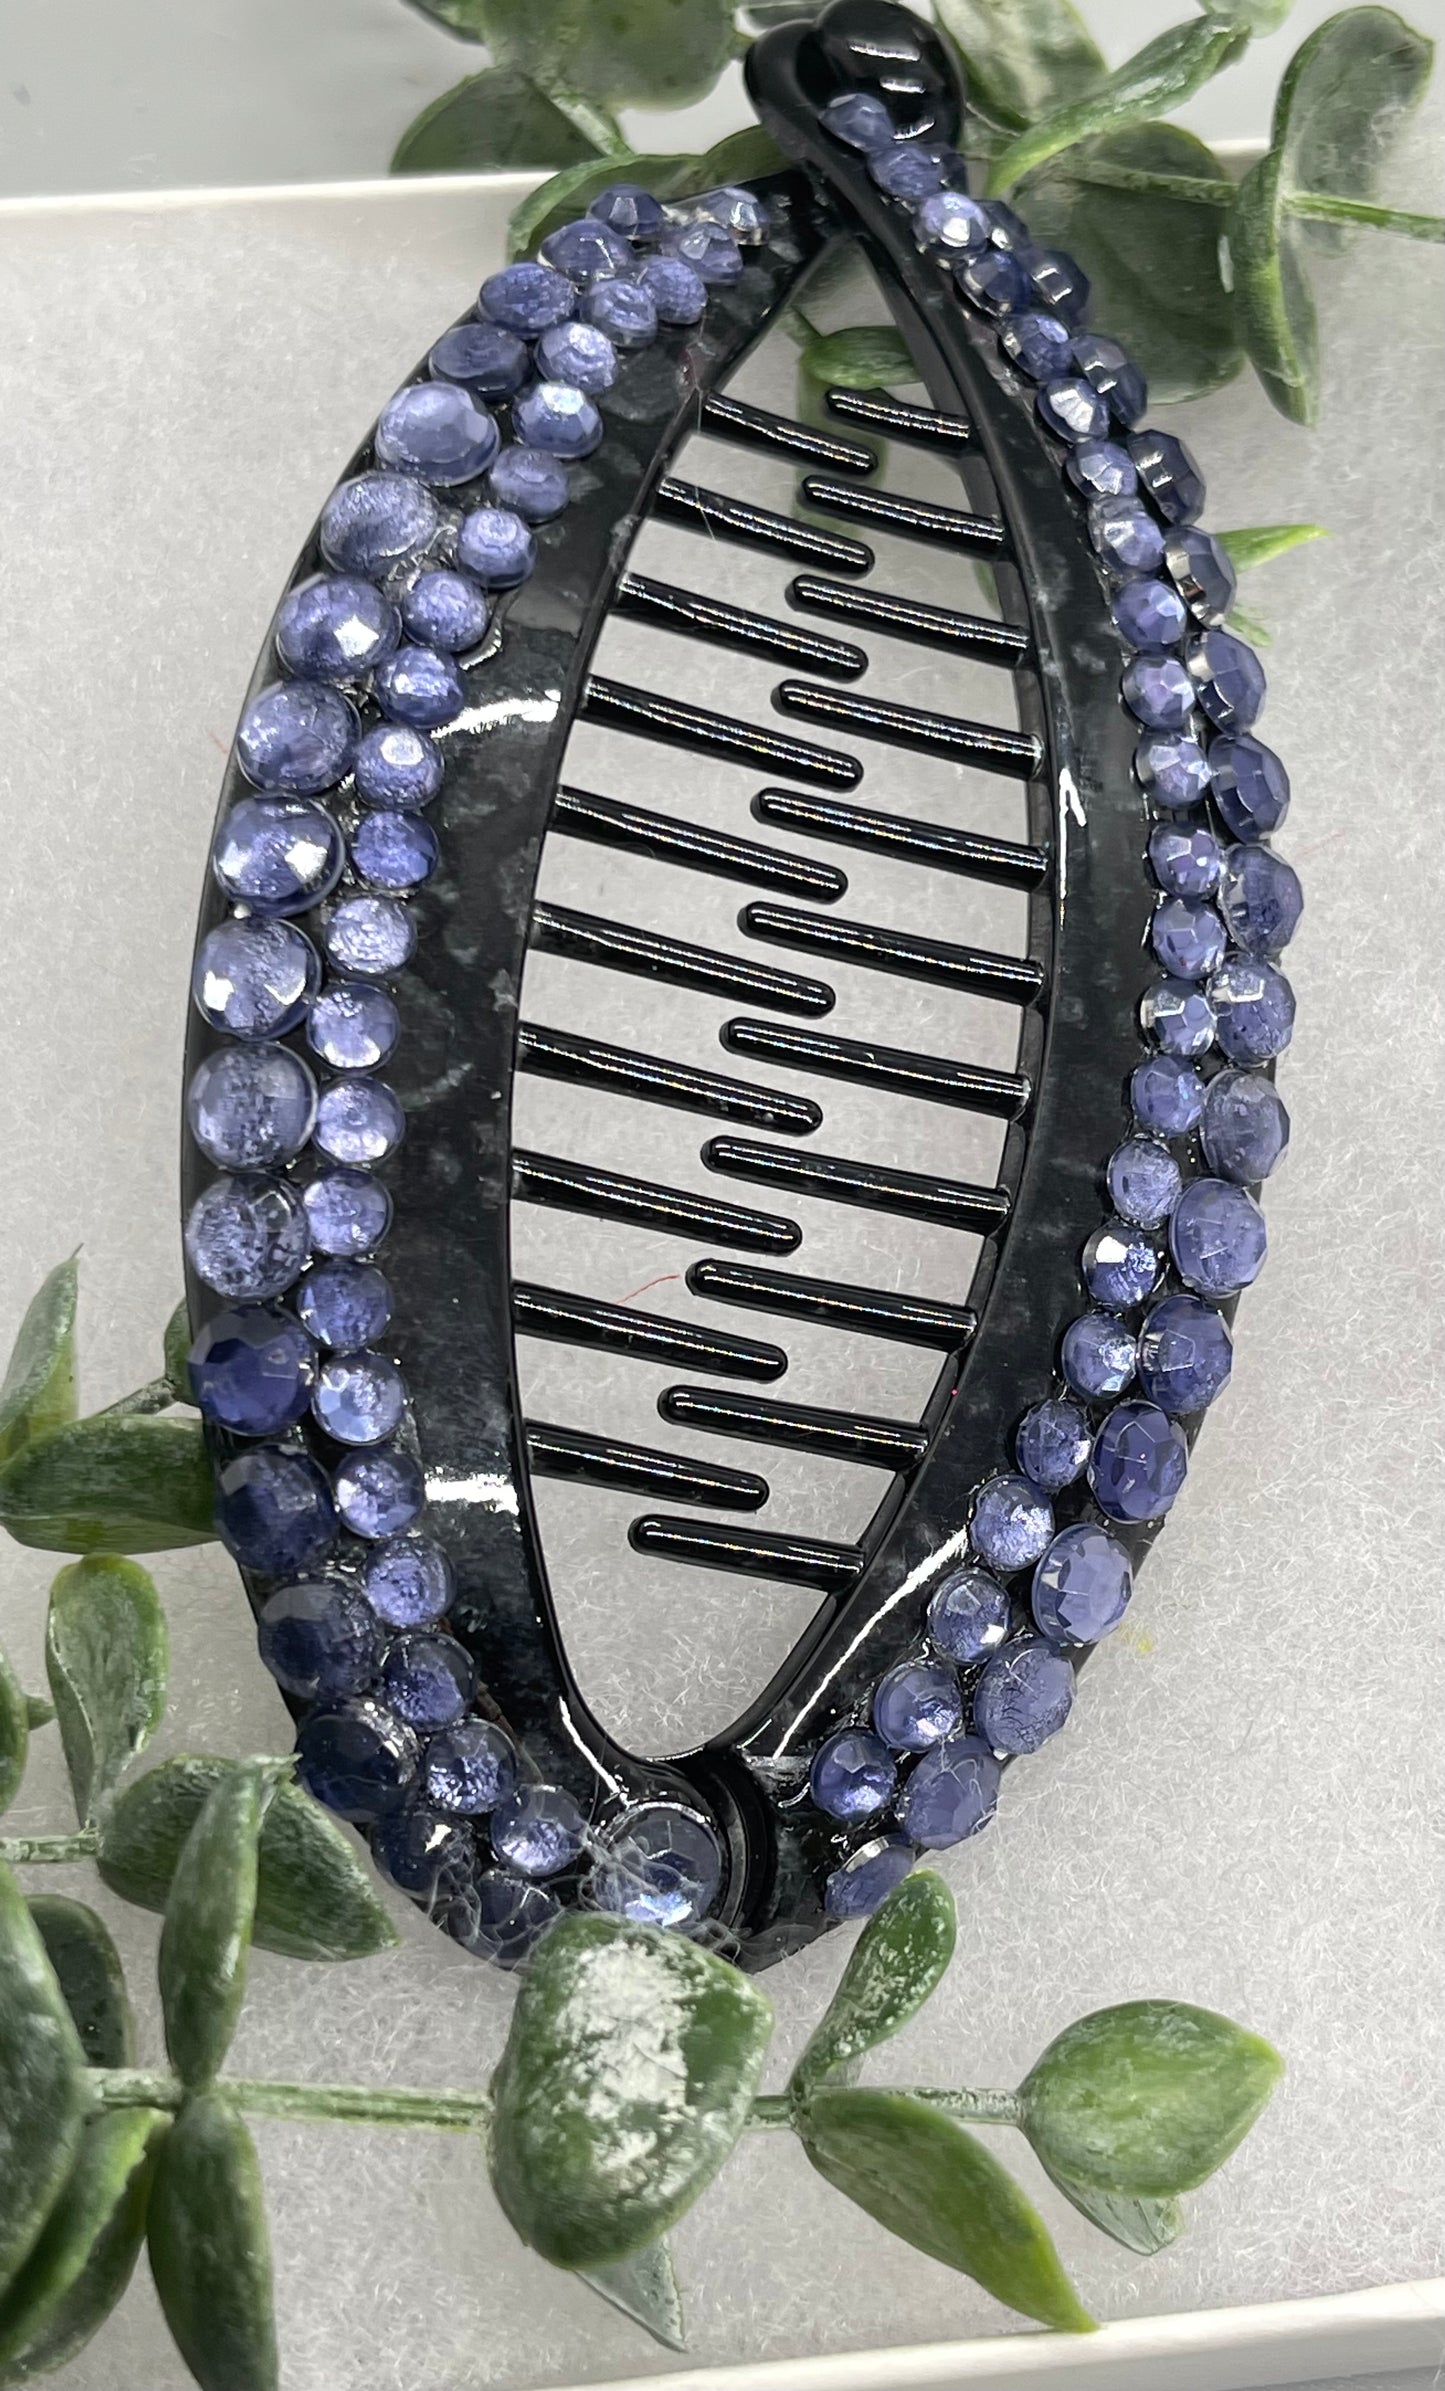 Blue crystal rhinestone hand Embellished 5” L 3”W Black banana comb clips bridesmaid wedding engagement party formal hair accessories